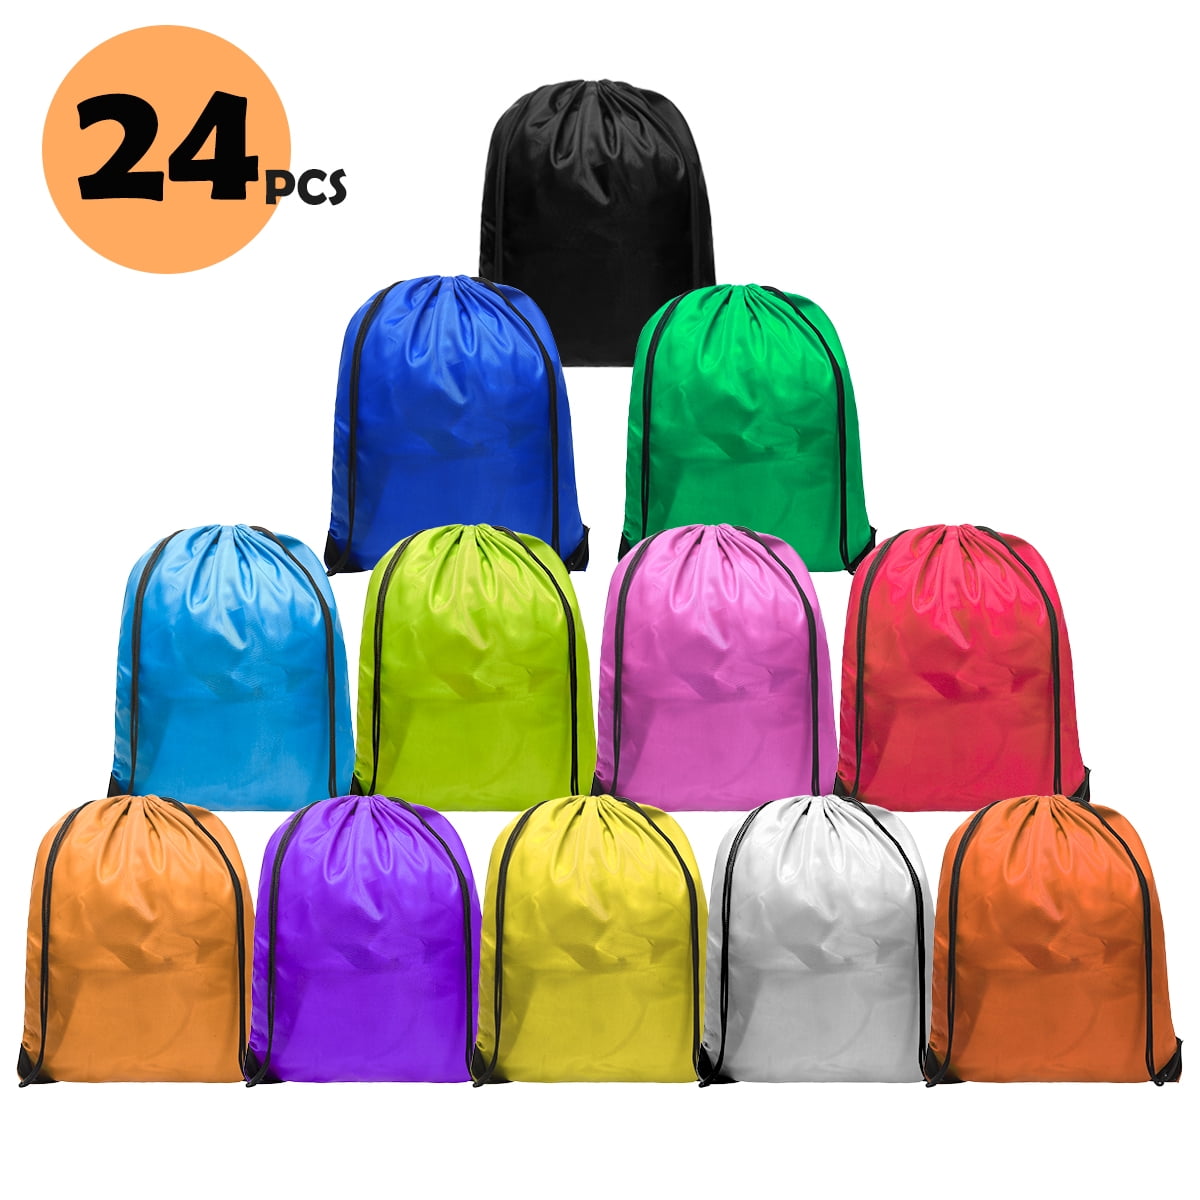 KUUQA Multicolor Drawstring Backpack Bags Cinch Sack Pull String Bags